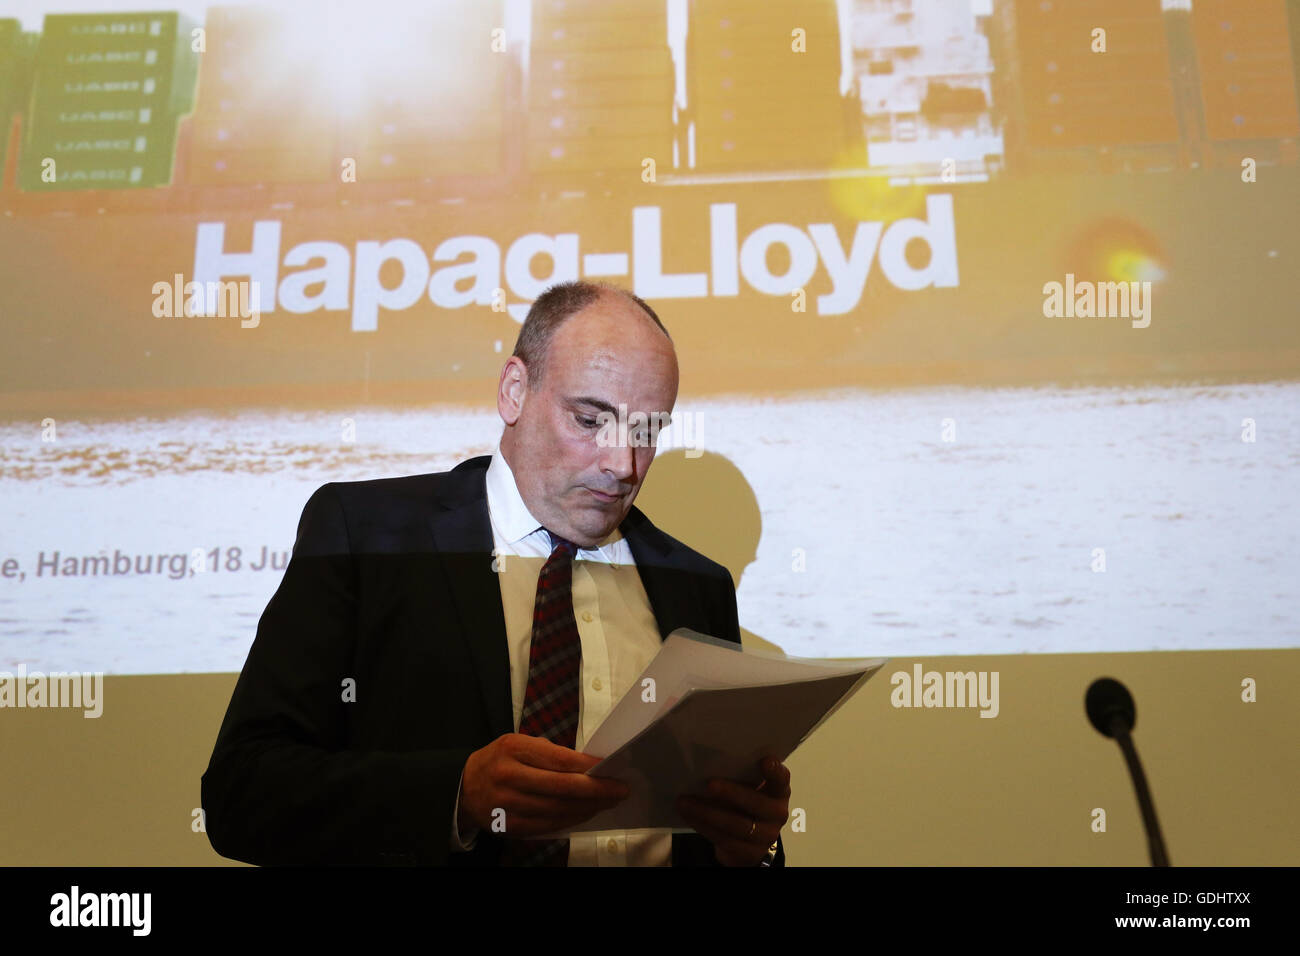 Cologne, Germany. 18th July, 2016. CEO of Hapag-Lloyd AG, Rolf Habben Jansen, arrives to a press conference at company headquarters in Cologne, Germany, 18 July 2016. After months of negotiations, the merger between Hapag-Lloyd and Arab shipping company UASC is a done deal. Photo: CHRISTIAN CHARISIUS/dpa/Alamy Live News Stock Photo